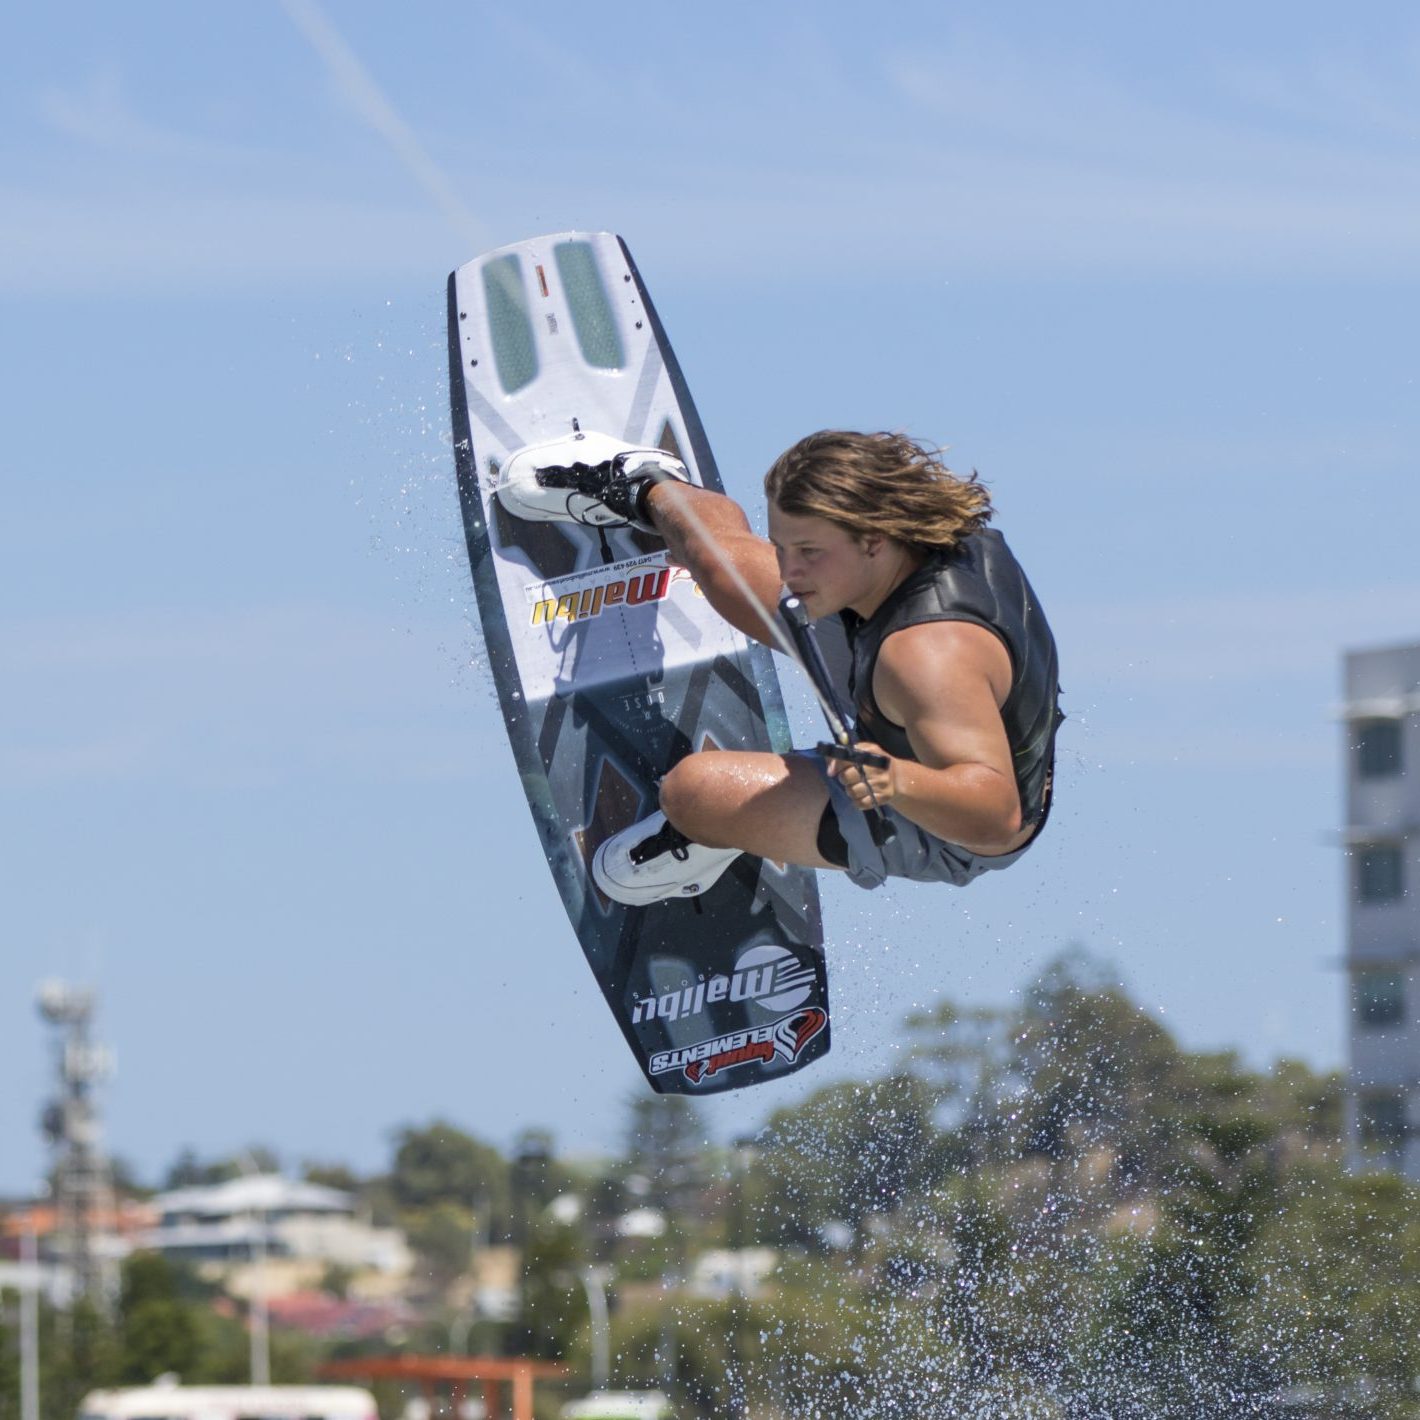 Featured image for “Action Sports Games Mandurah 2021”